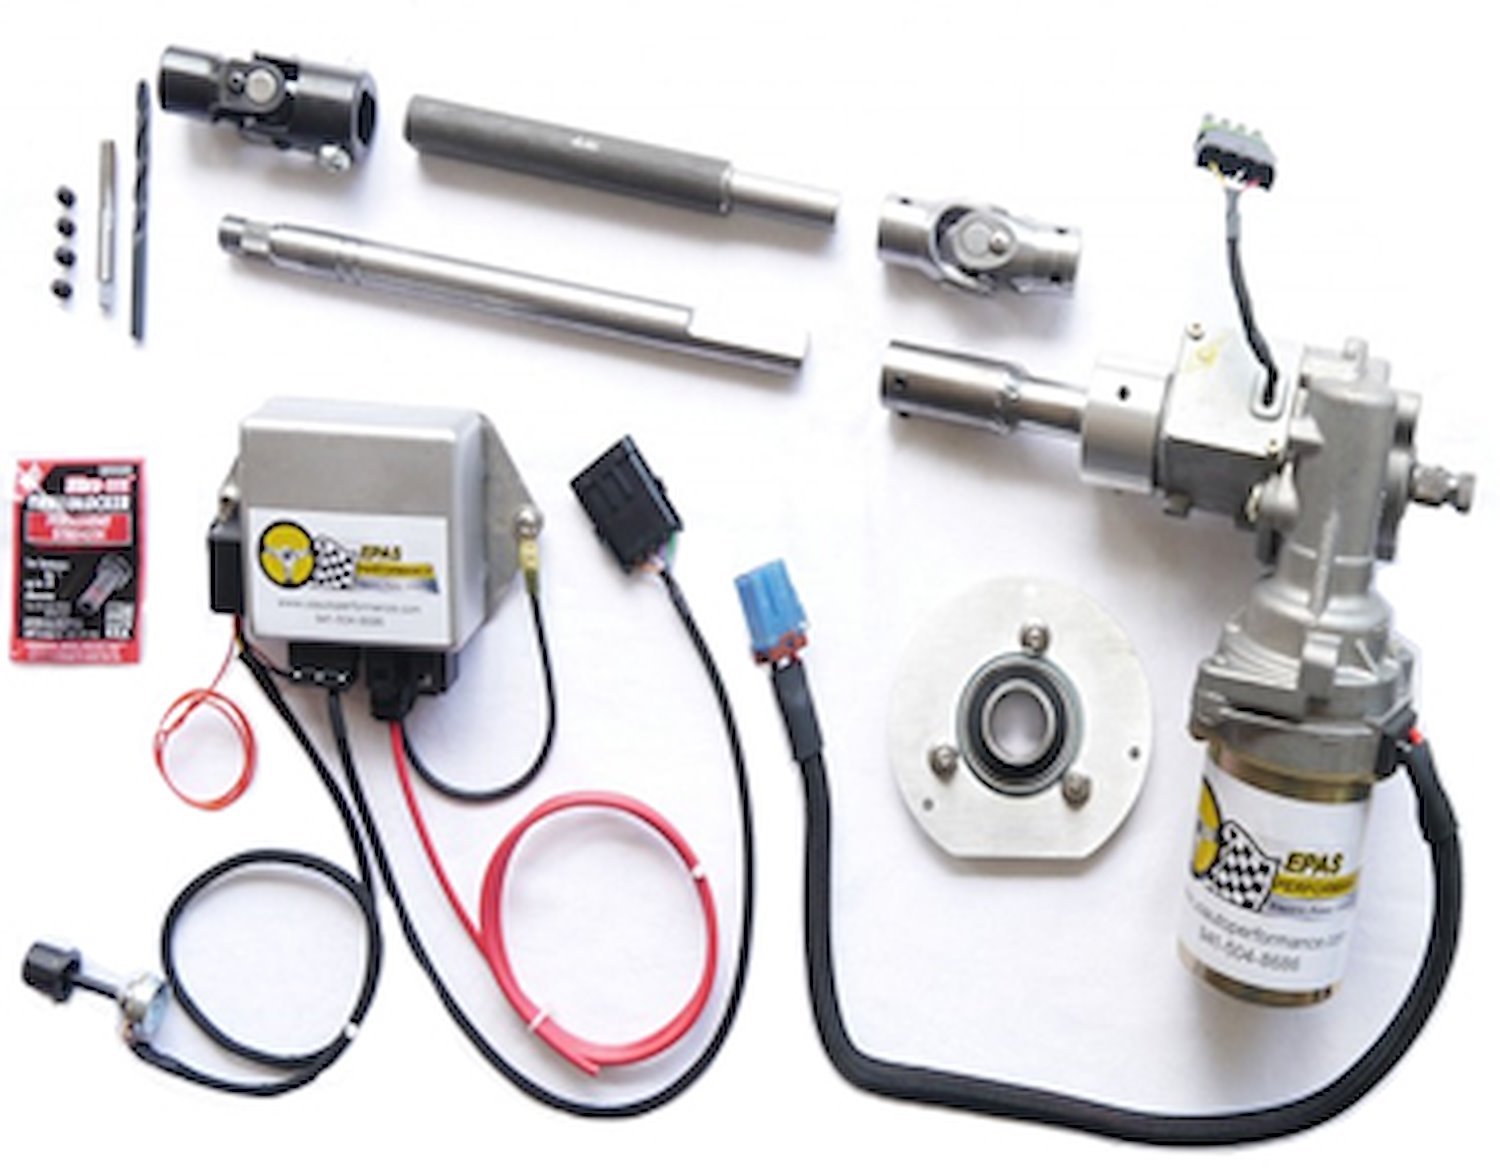 Electric Power Steering Conversion Kit